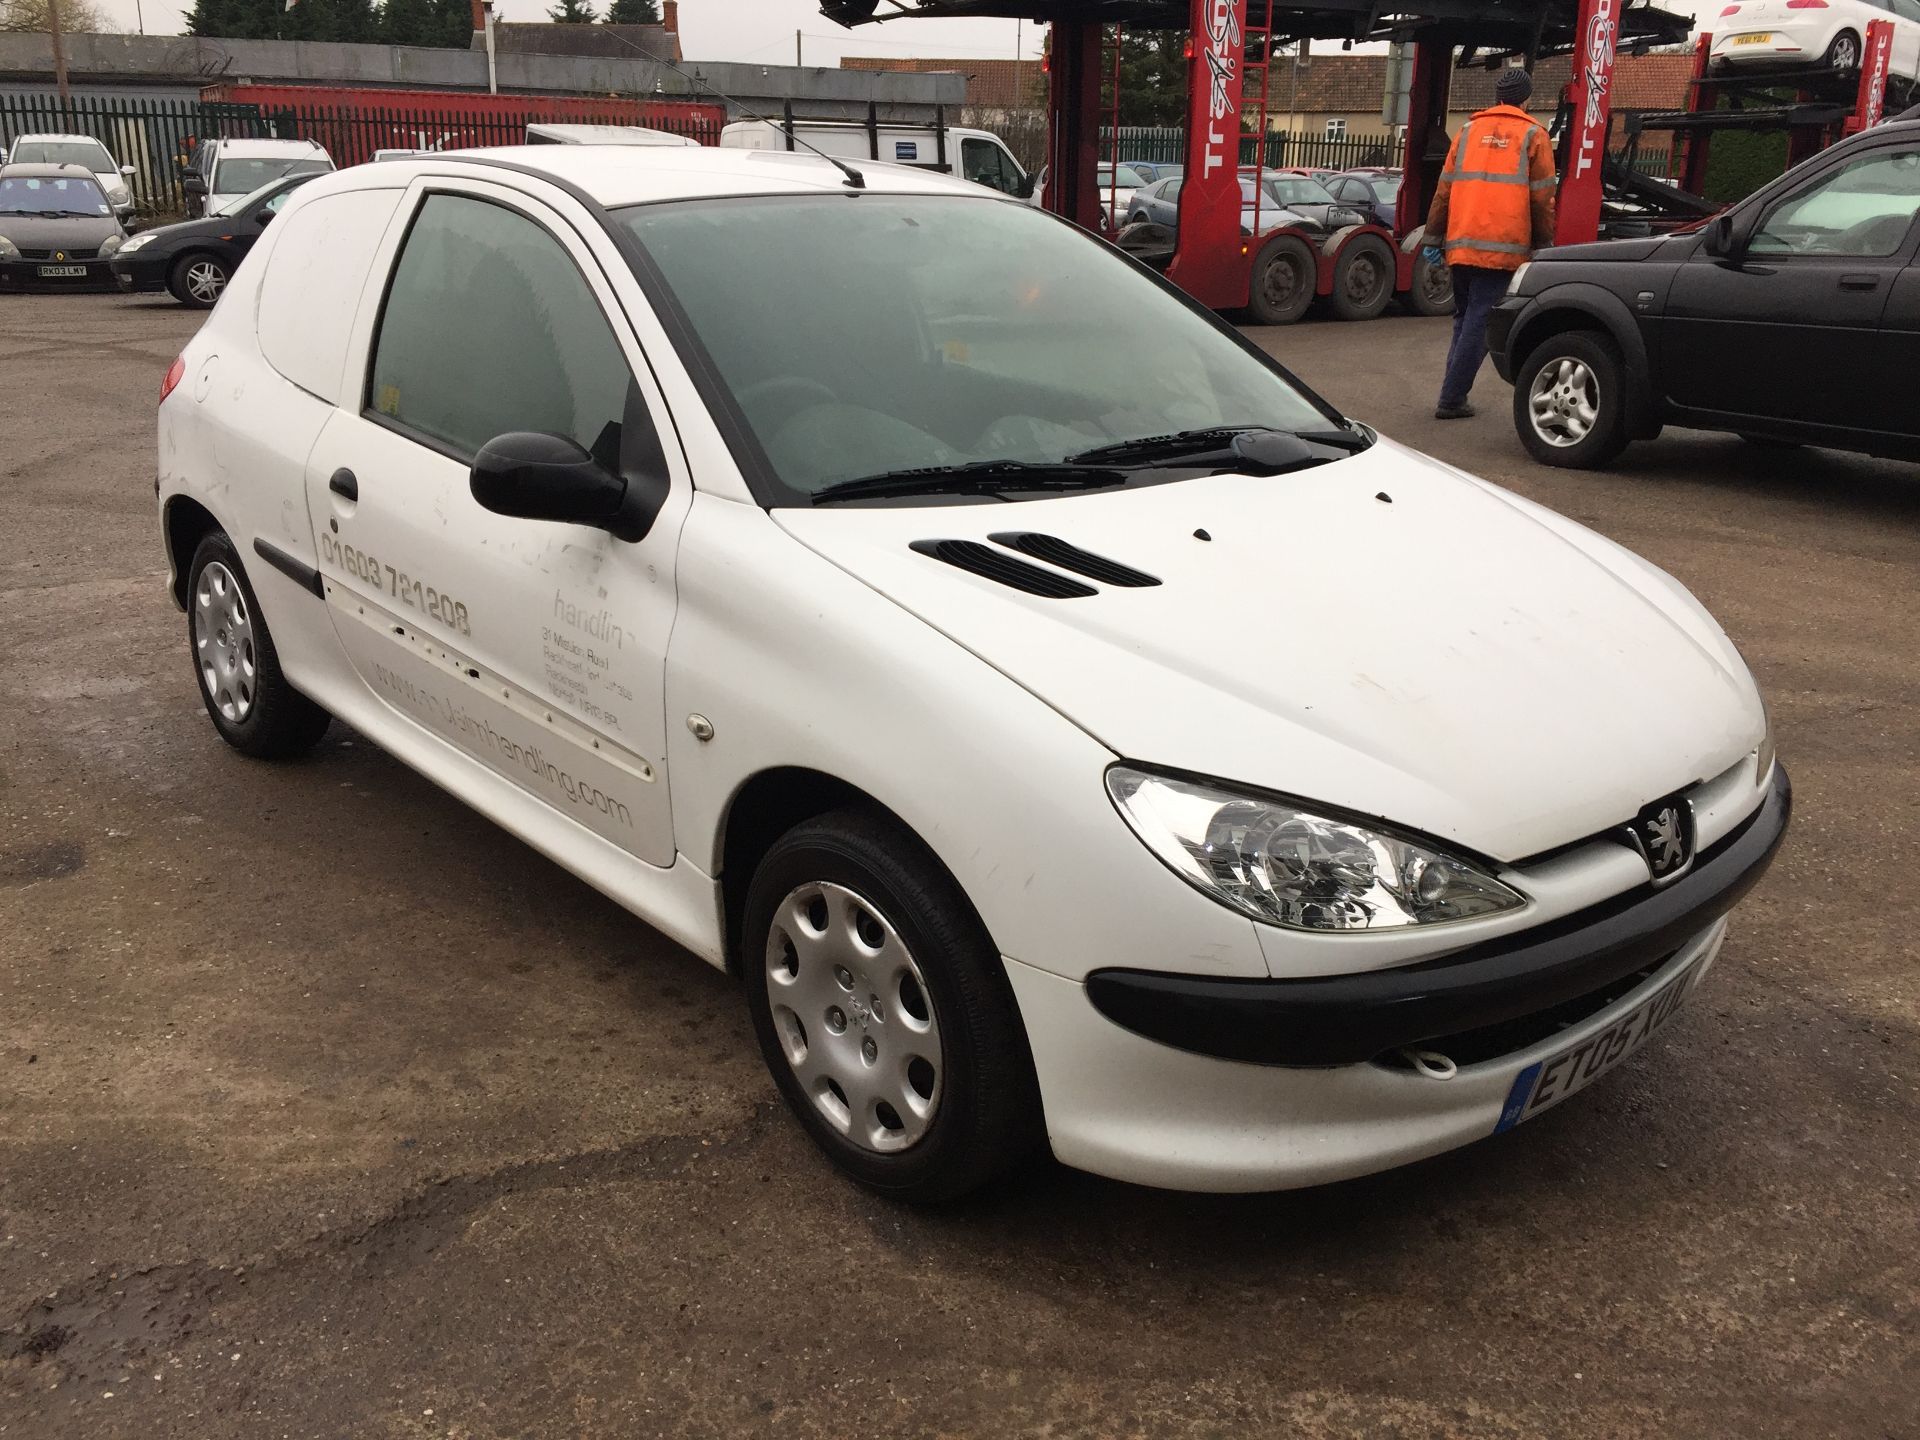 2005/05 REG PEUGEOT 206 HDI, 5 SPEED MANUAL, SHOWING 1 OWNER FROM NEW *NO VAT*   DATE OF